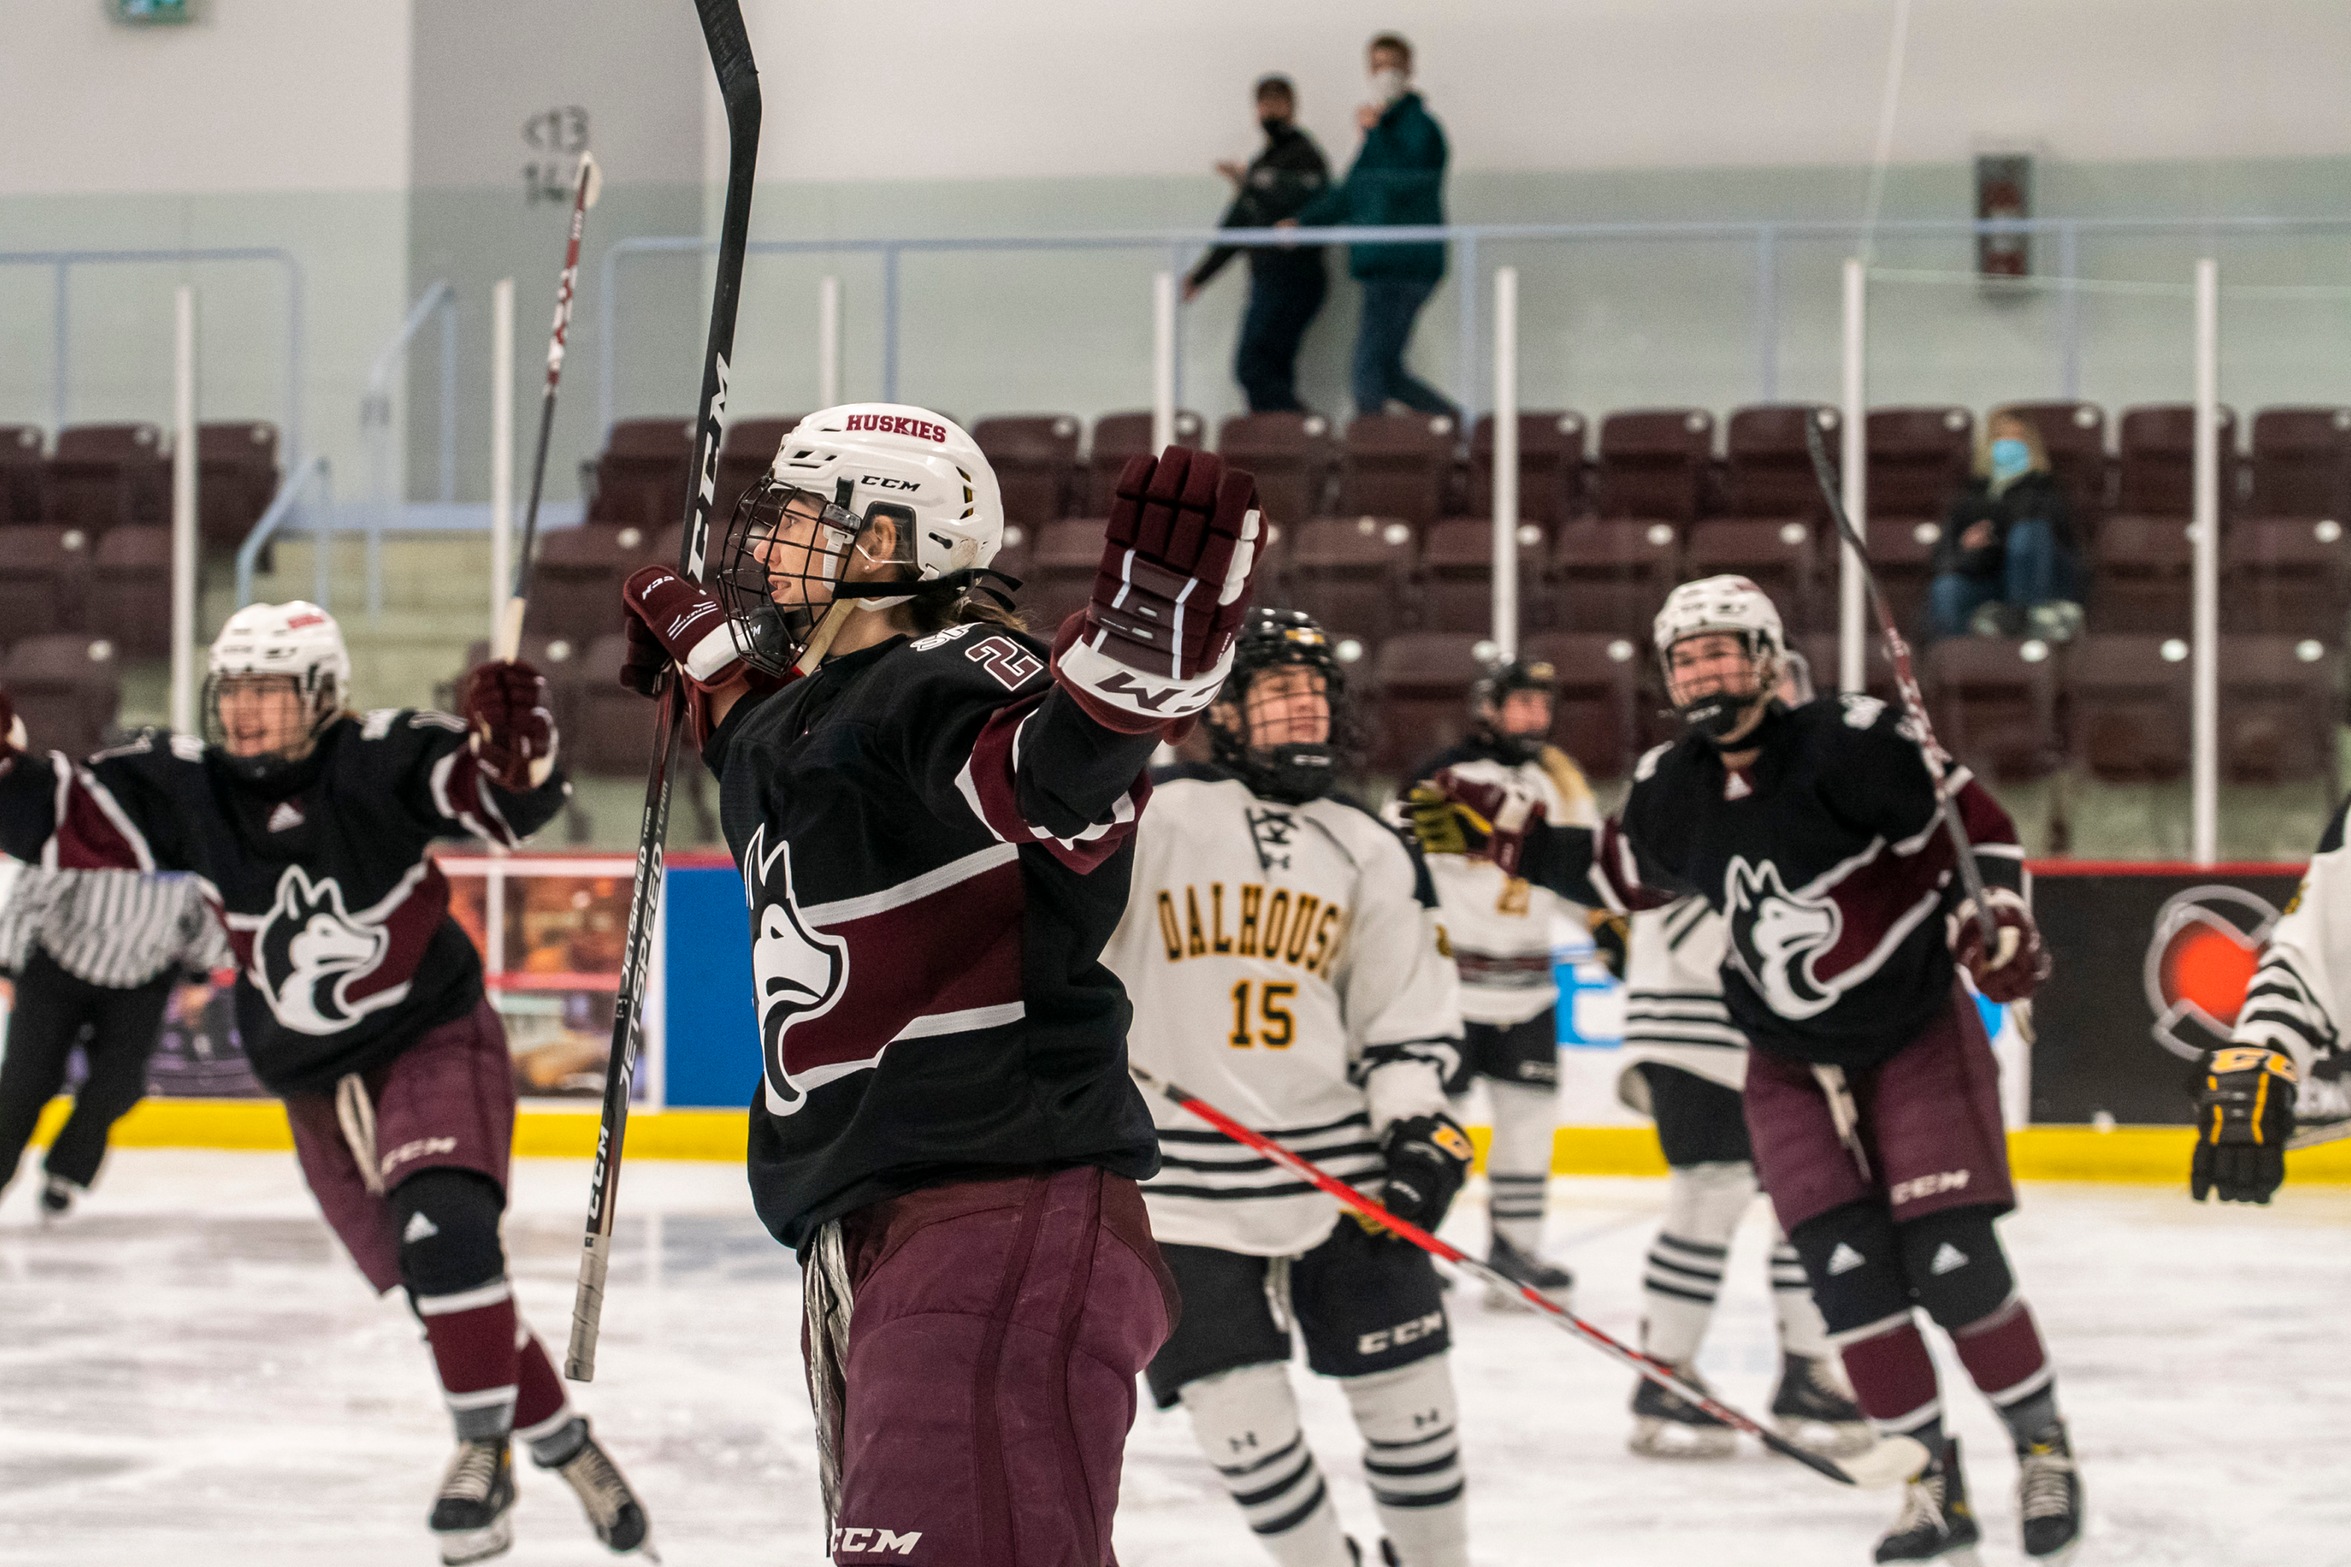 Huskies forward Mary McDonald celebrates after scoring a goal in Saint Mary's 5-0 win over the Dalhousie Tigers at the Dauphinee Centre on Feb. 23, 2022.